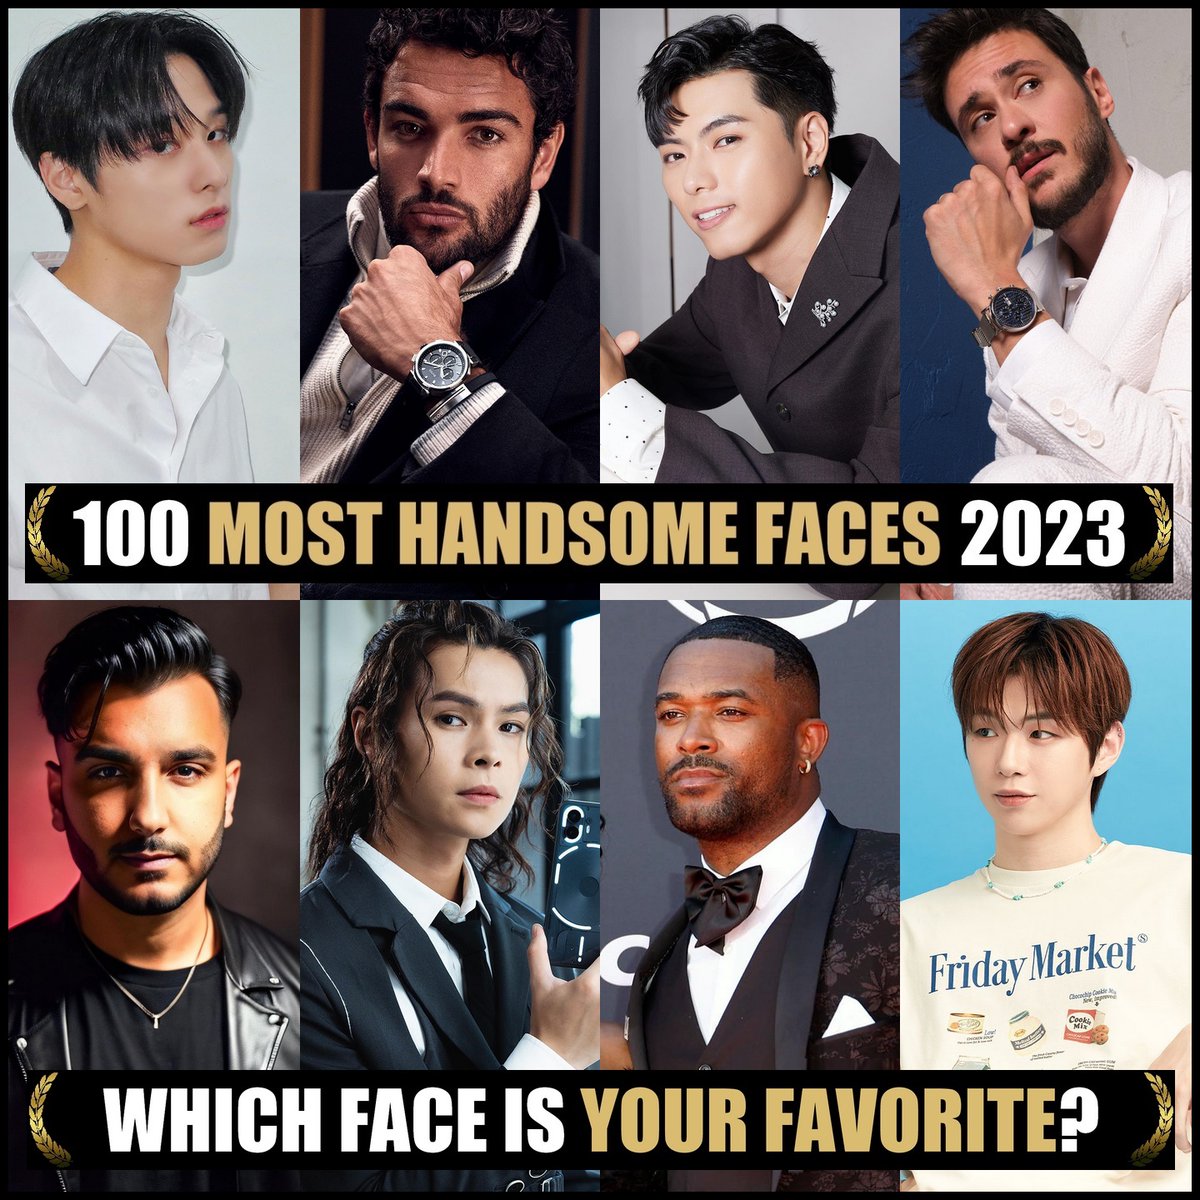 Nominations for The 100 Most Handsome Faces of 2023. Congratulations to all! If you would like to nominate & vote, please join Patreon (Link Bio). #TCCandler #100faces2023 #JUYEON #THEBOYZ #matteoberrettini #deniskwok #anilaltan #tigeryau #mirror #montezford #wwe #KANGDANIEL